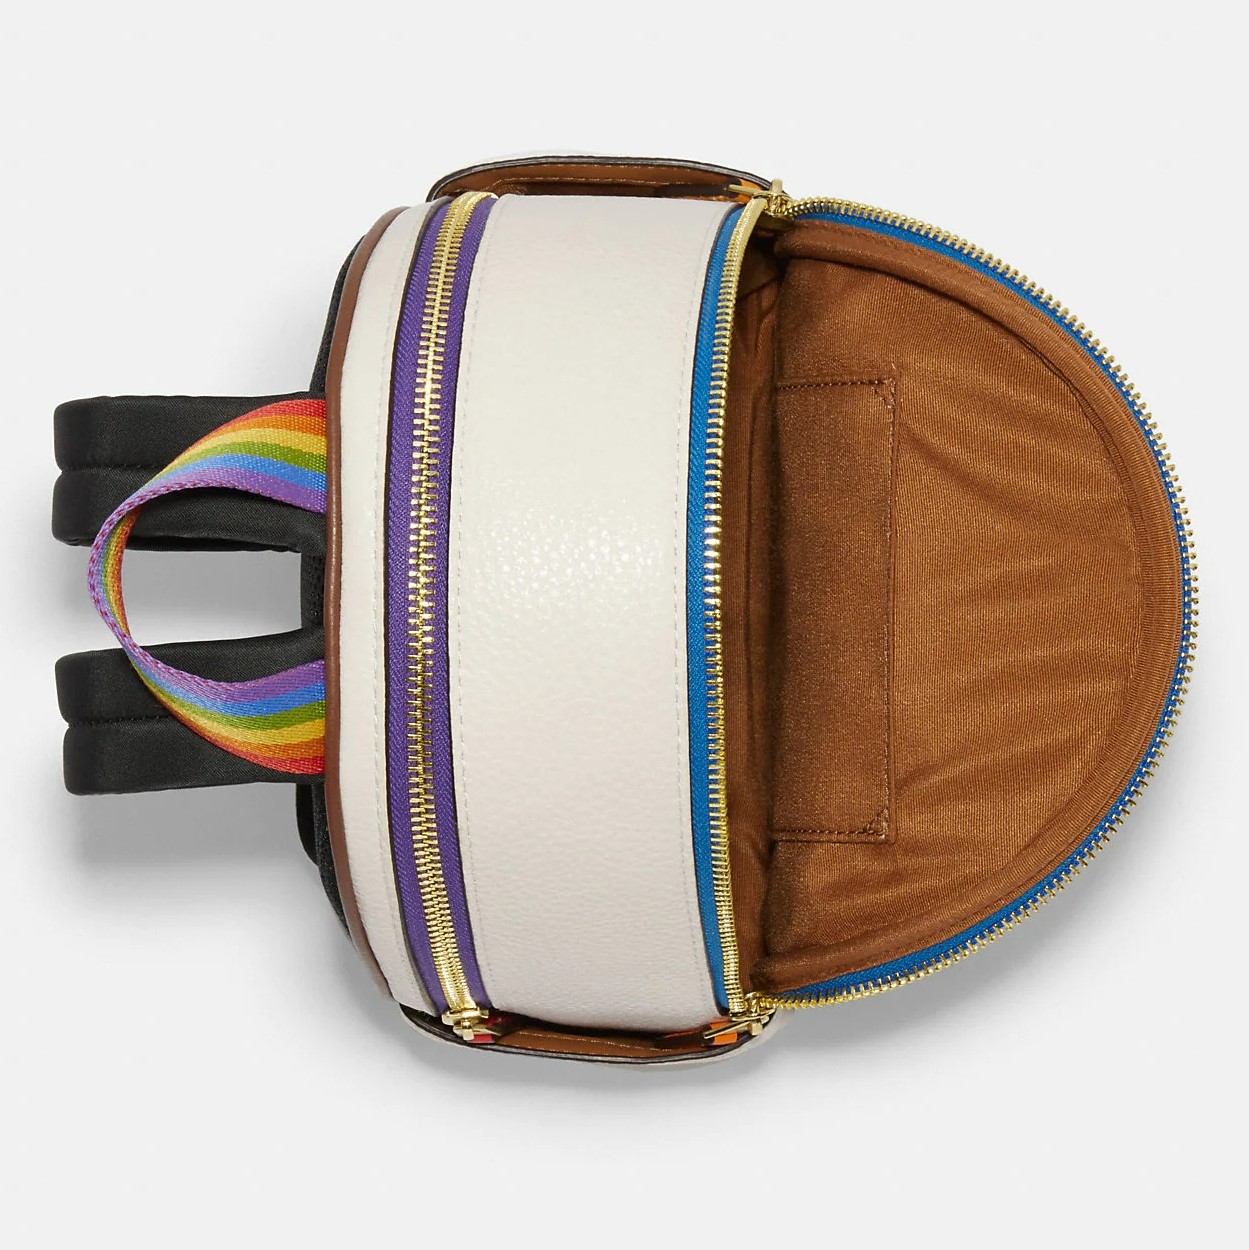 BALO HỌA TIẾT CẦU VỒNG COACH MINI COURT BACKPACK WITH RAINBOW 1